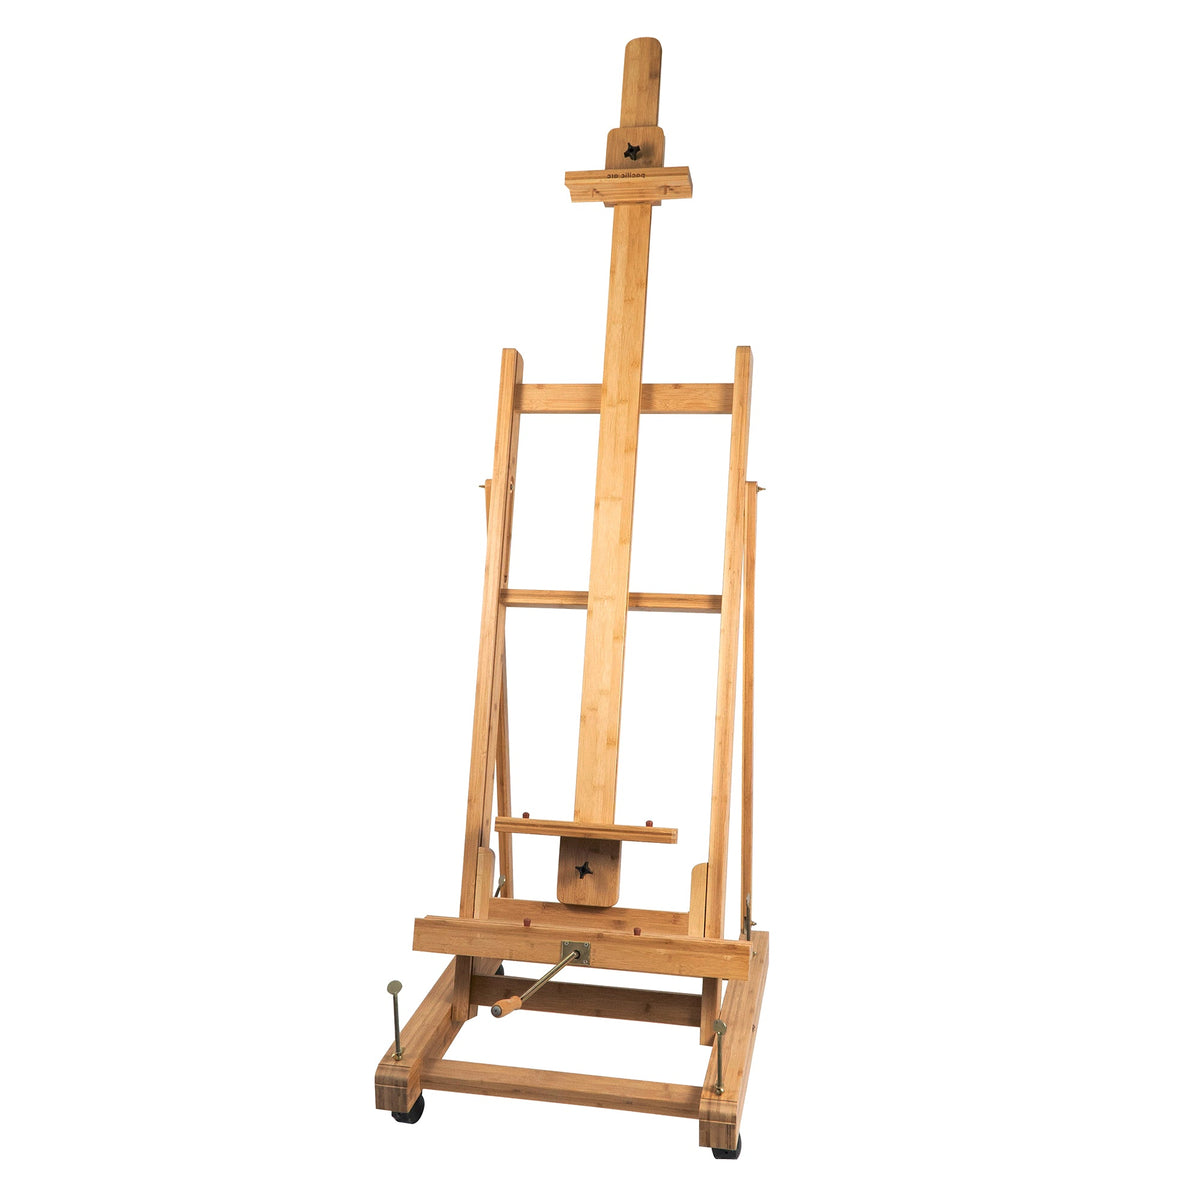 Large Studio H-Frame Easel - Solid Bamboo Wood Artist Easel Adjustable  Movable Tilting Easel, Floor Painting Easel Stand, Holds Canvas Art up to  81